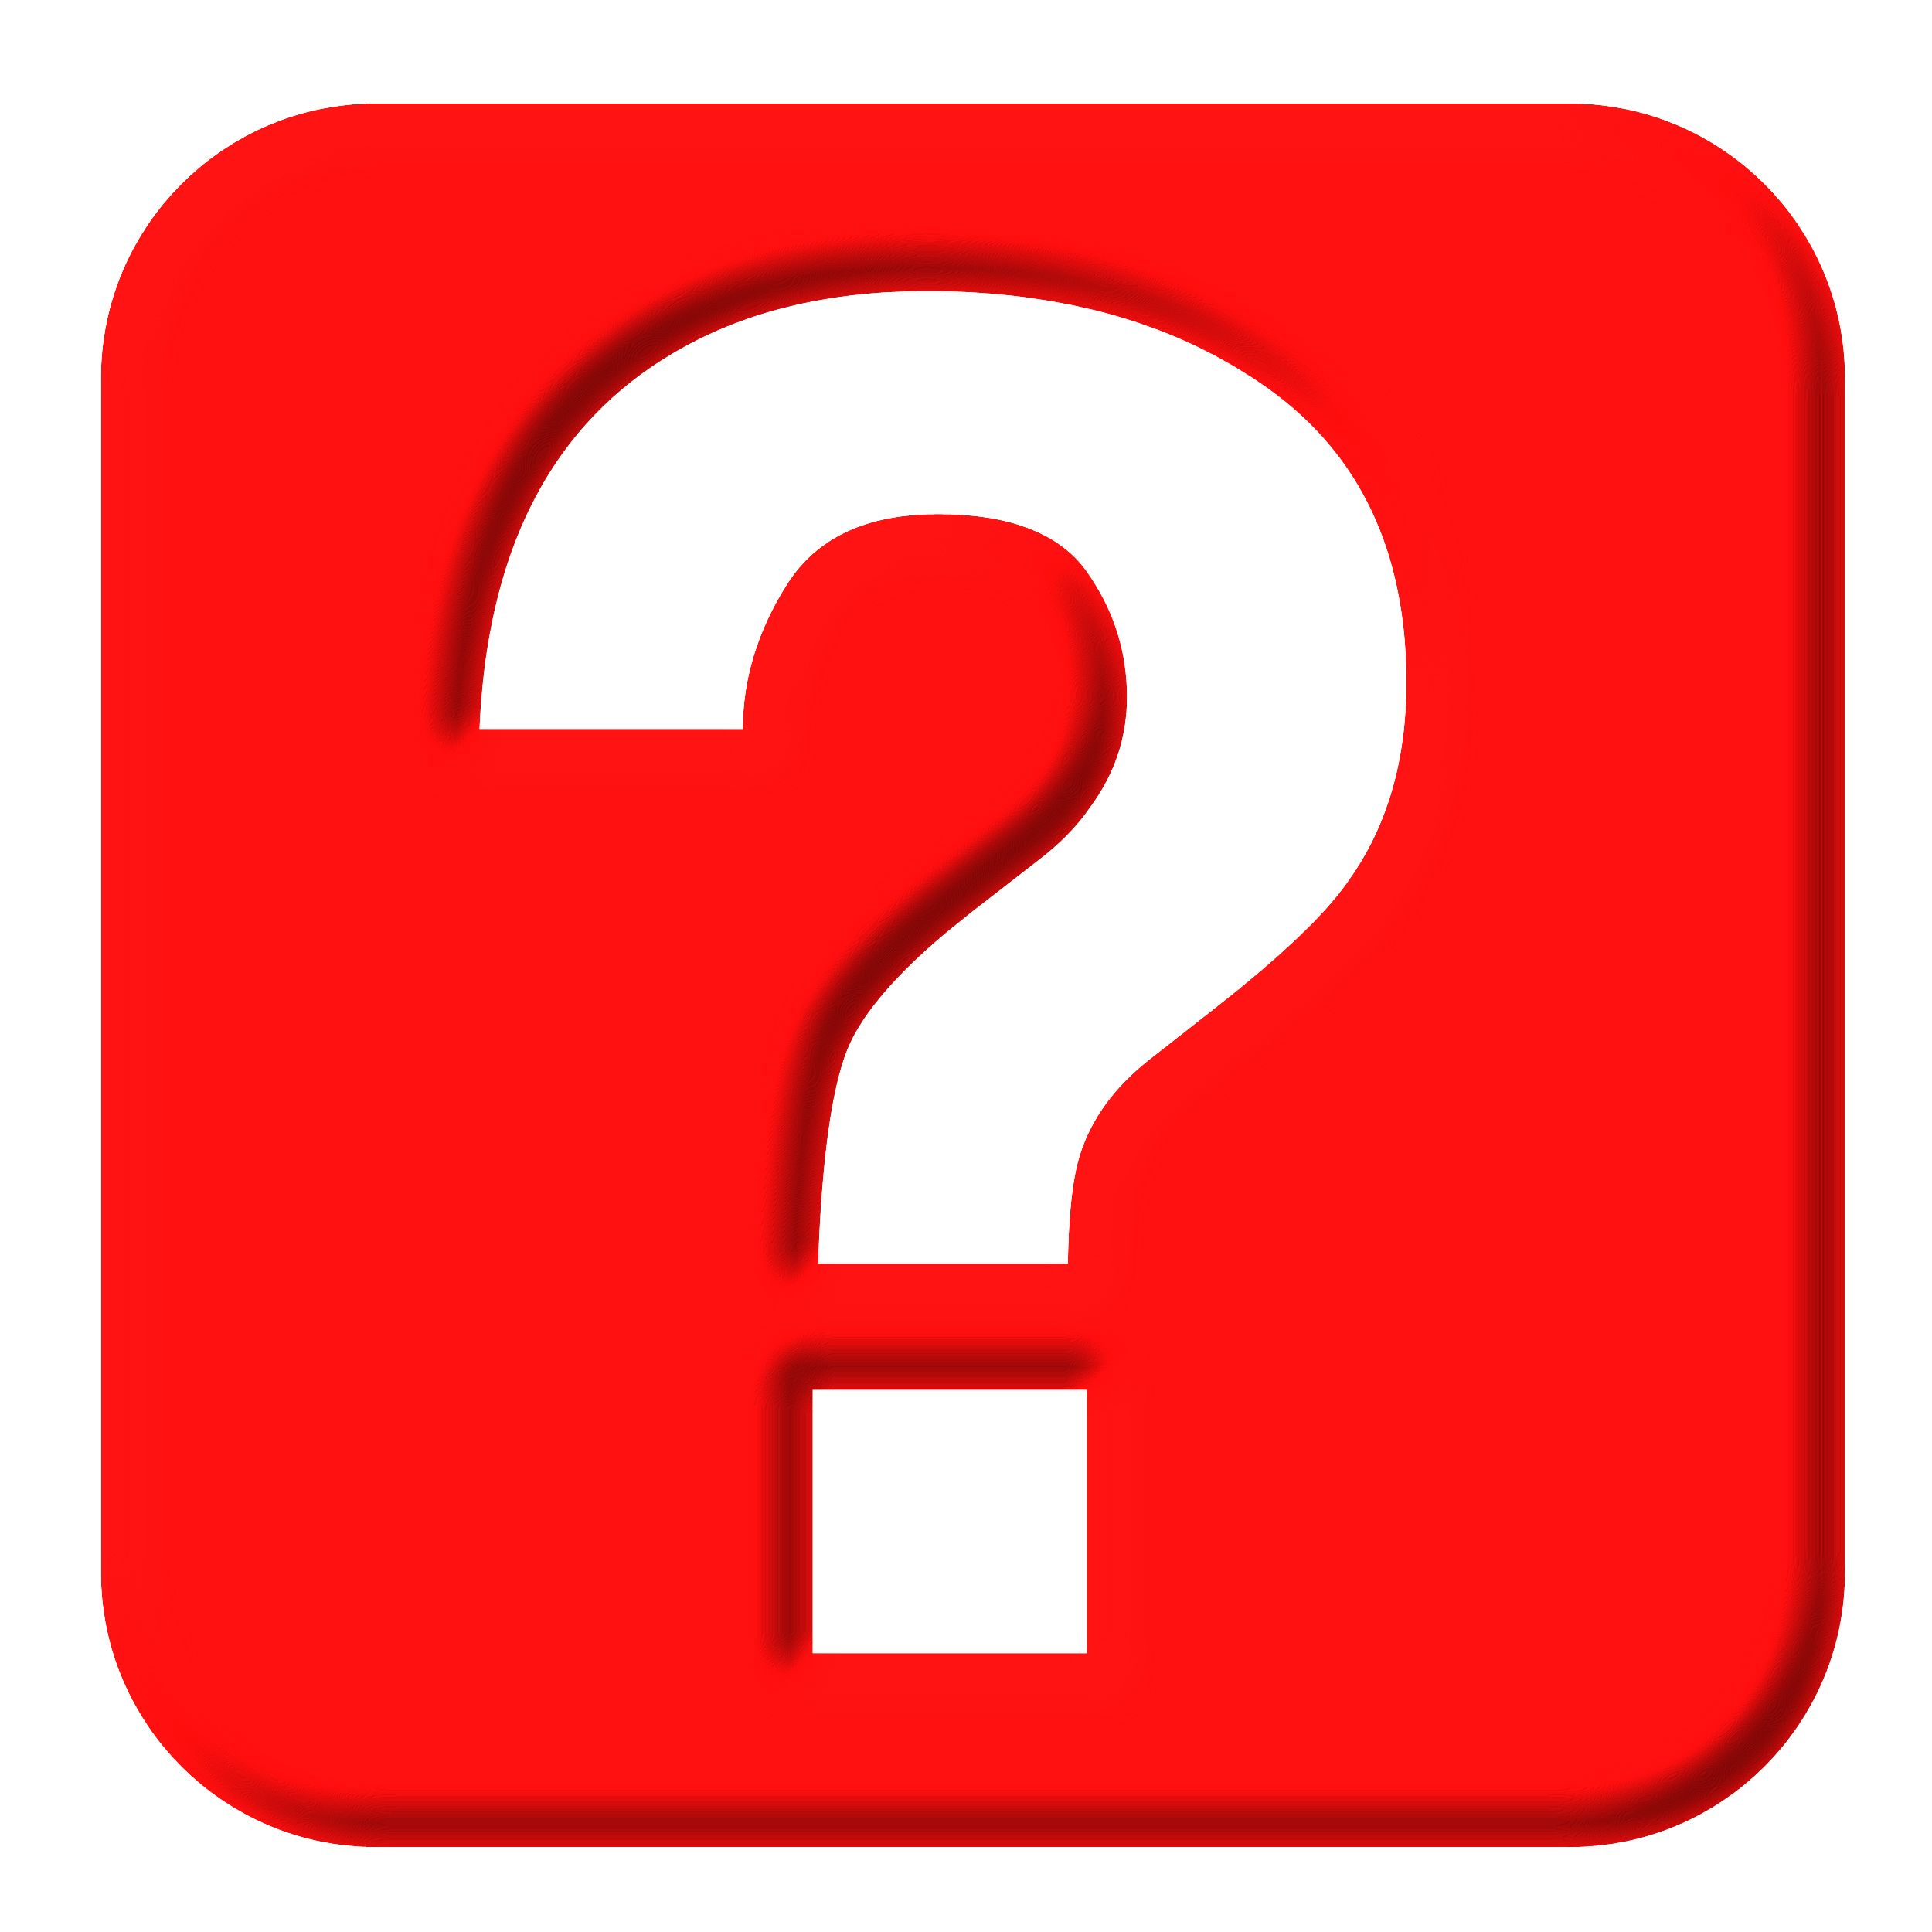 Big Red Question Mark - ClipArt Best